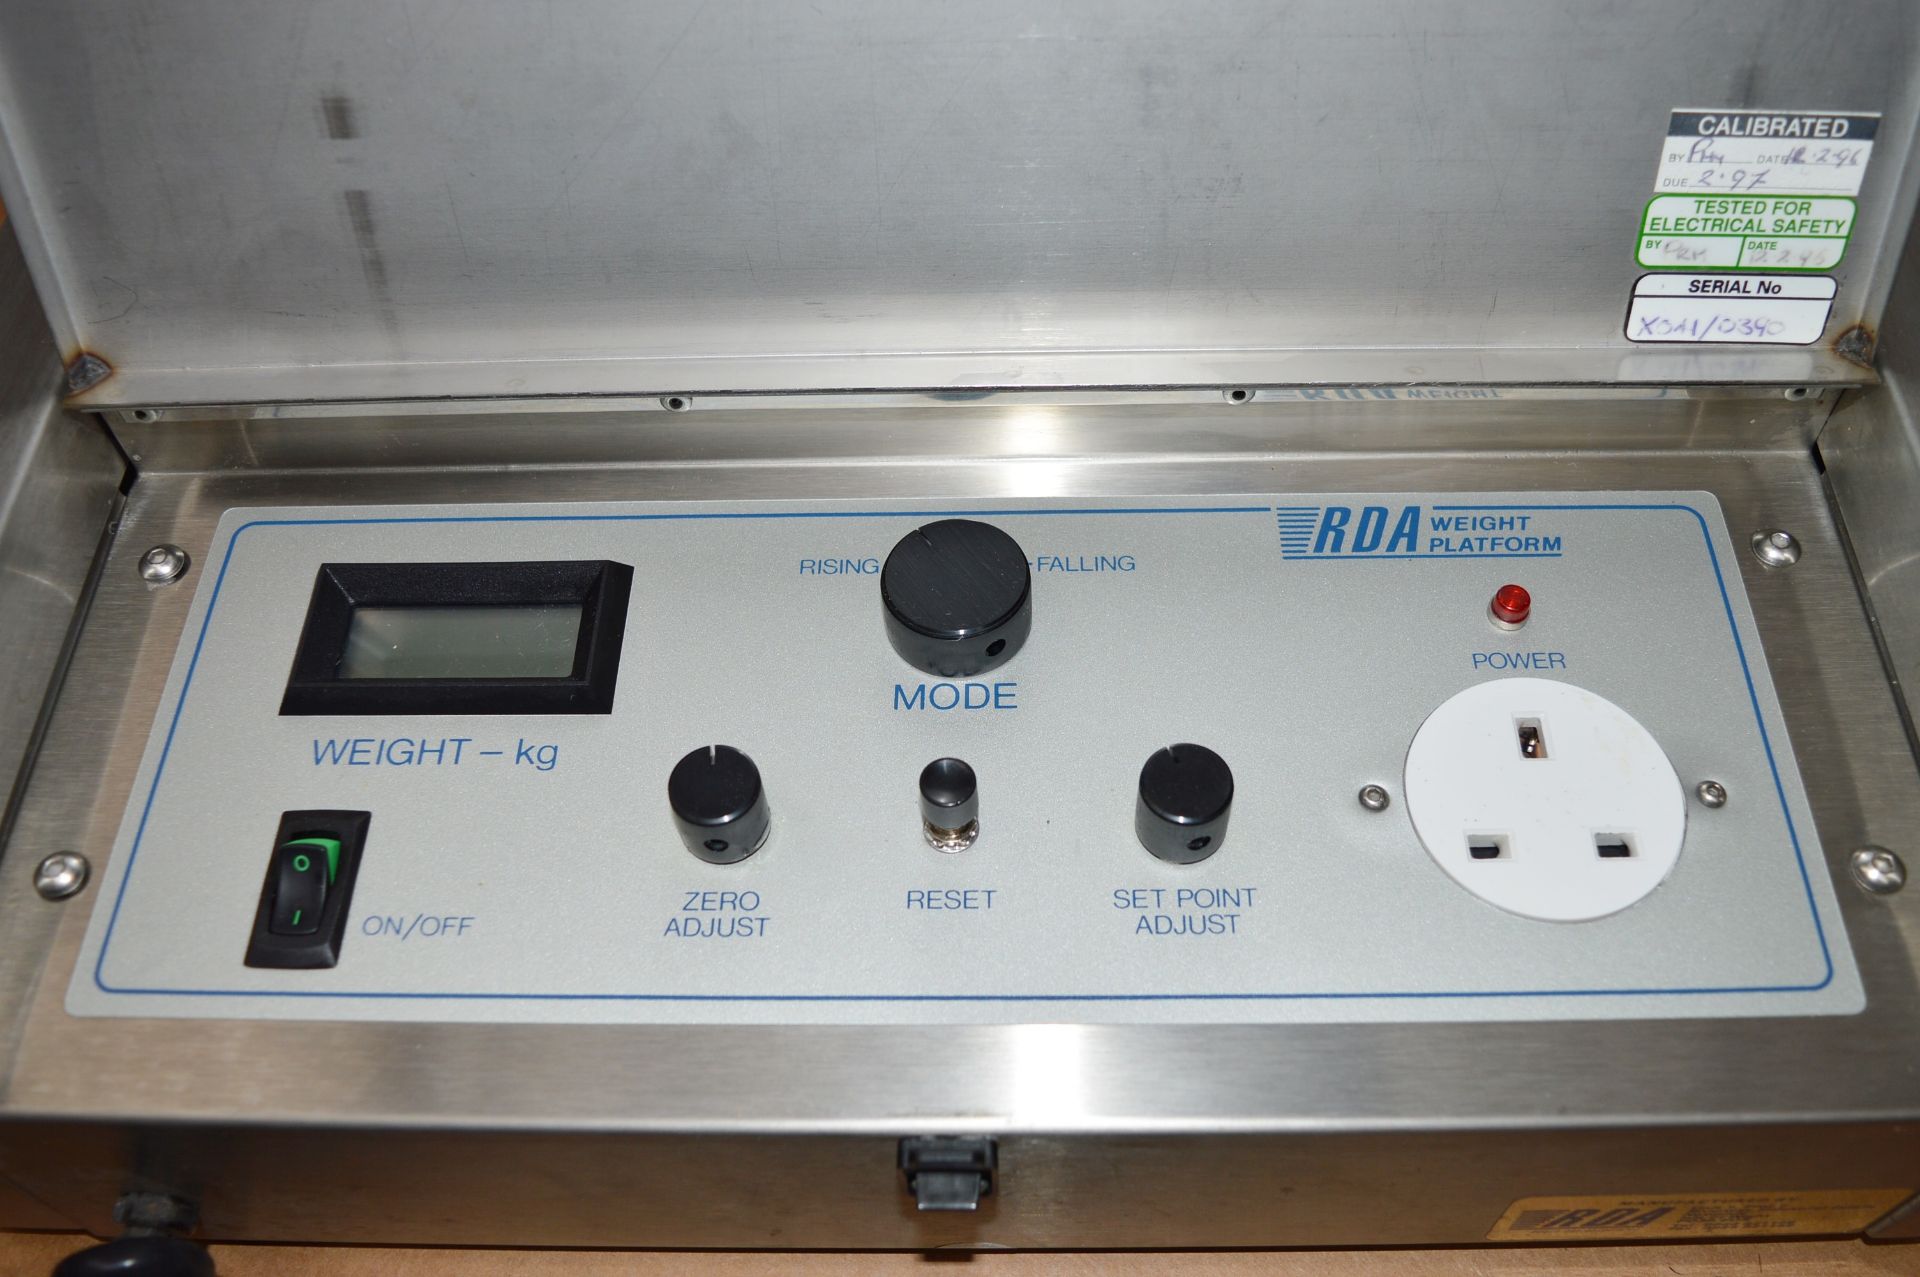 1 x RDA Professional Weight Platform Scale - CL011 - Designed For Refilling Refrigerant Cylinders, - Image 10 of 12